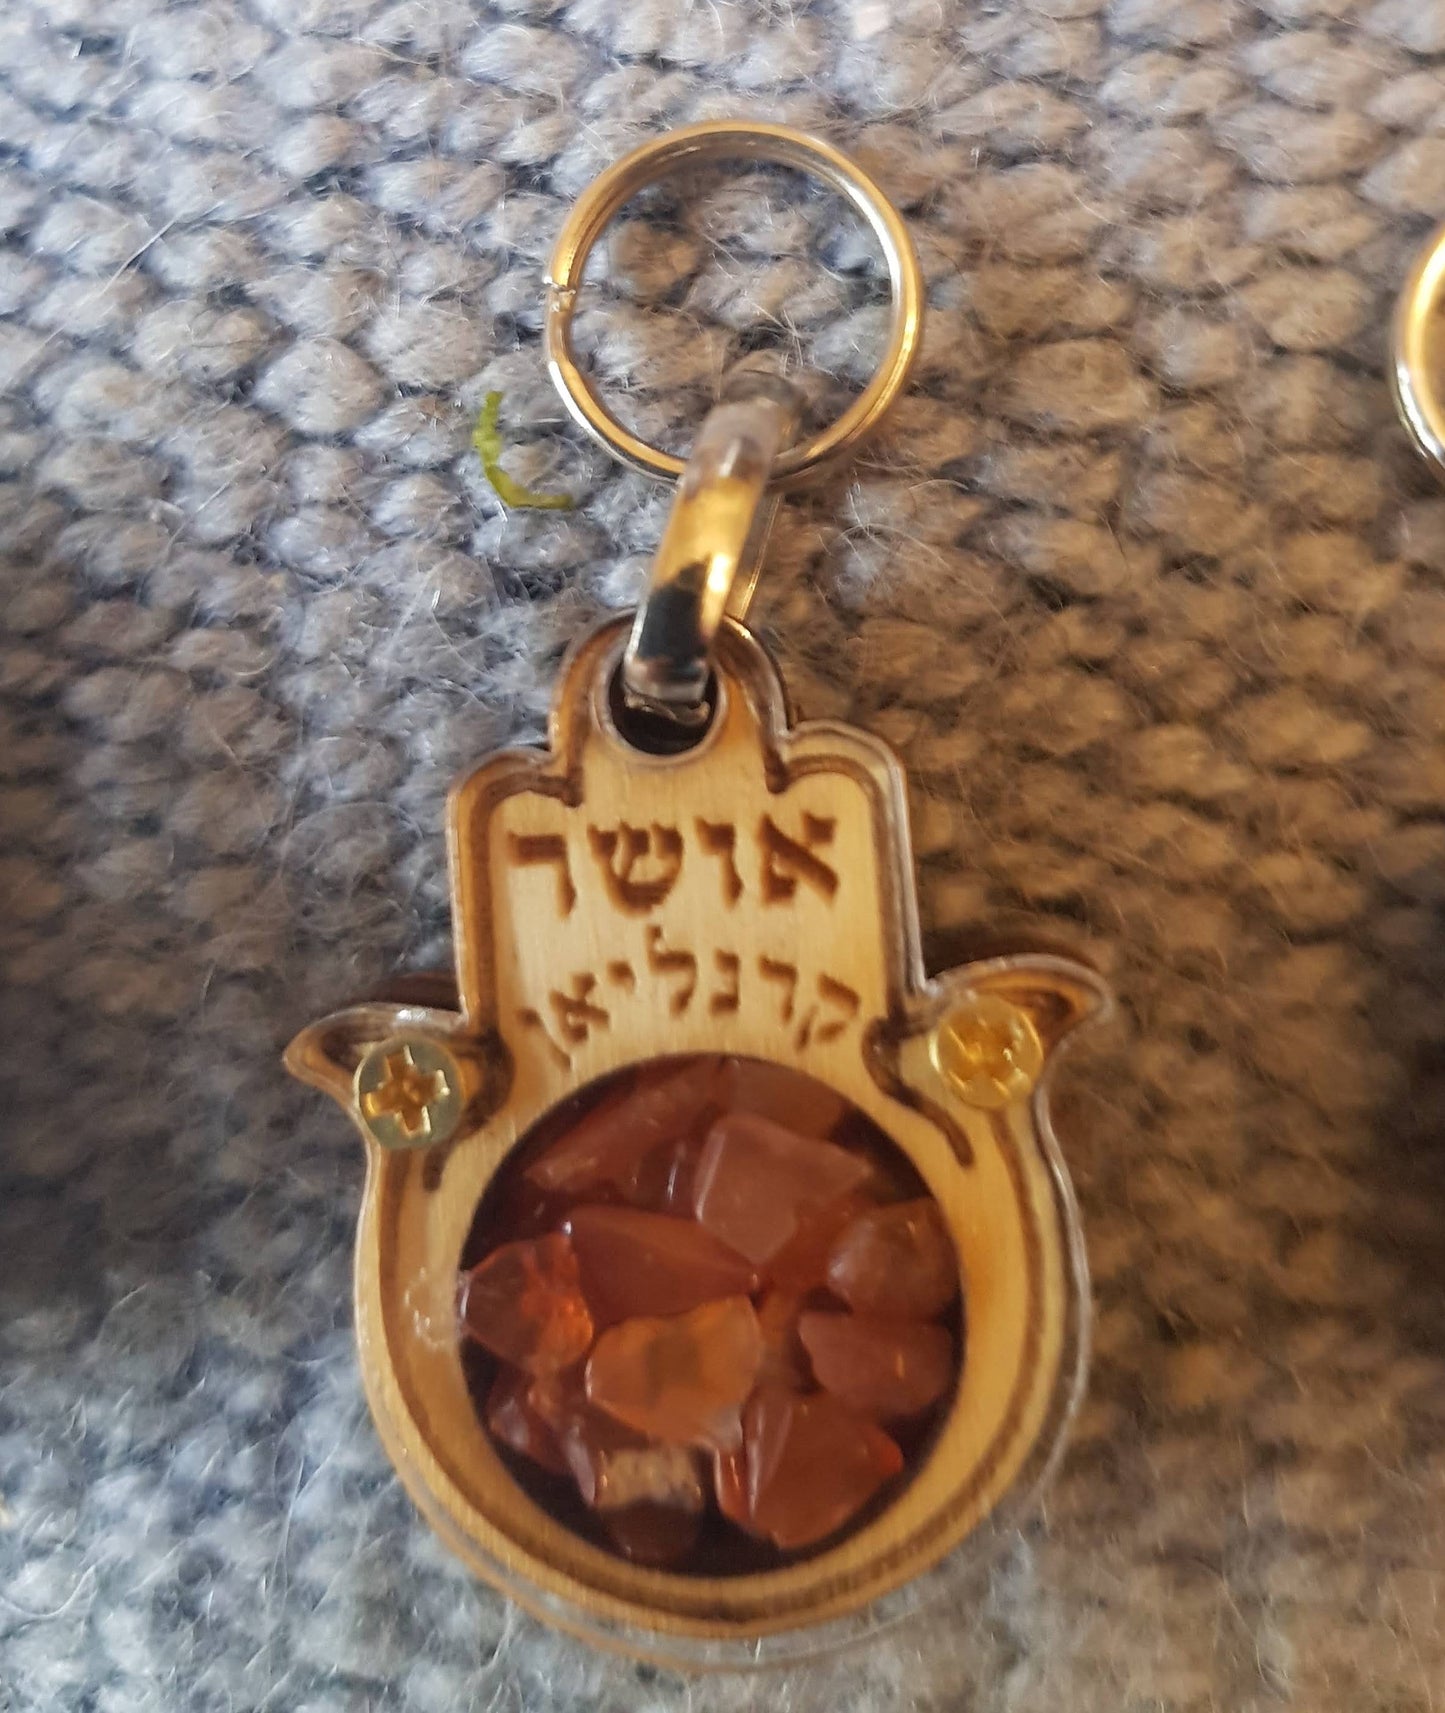 Bluenoemi Jewelry Keyholder Wood Lucky Hamsa Key Holder with Hebrew Blessings made in the Holy Land